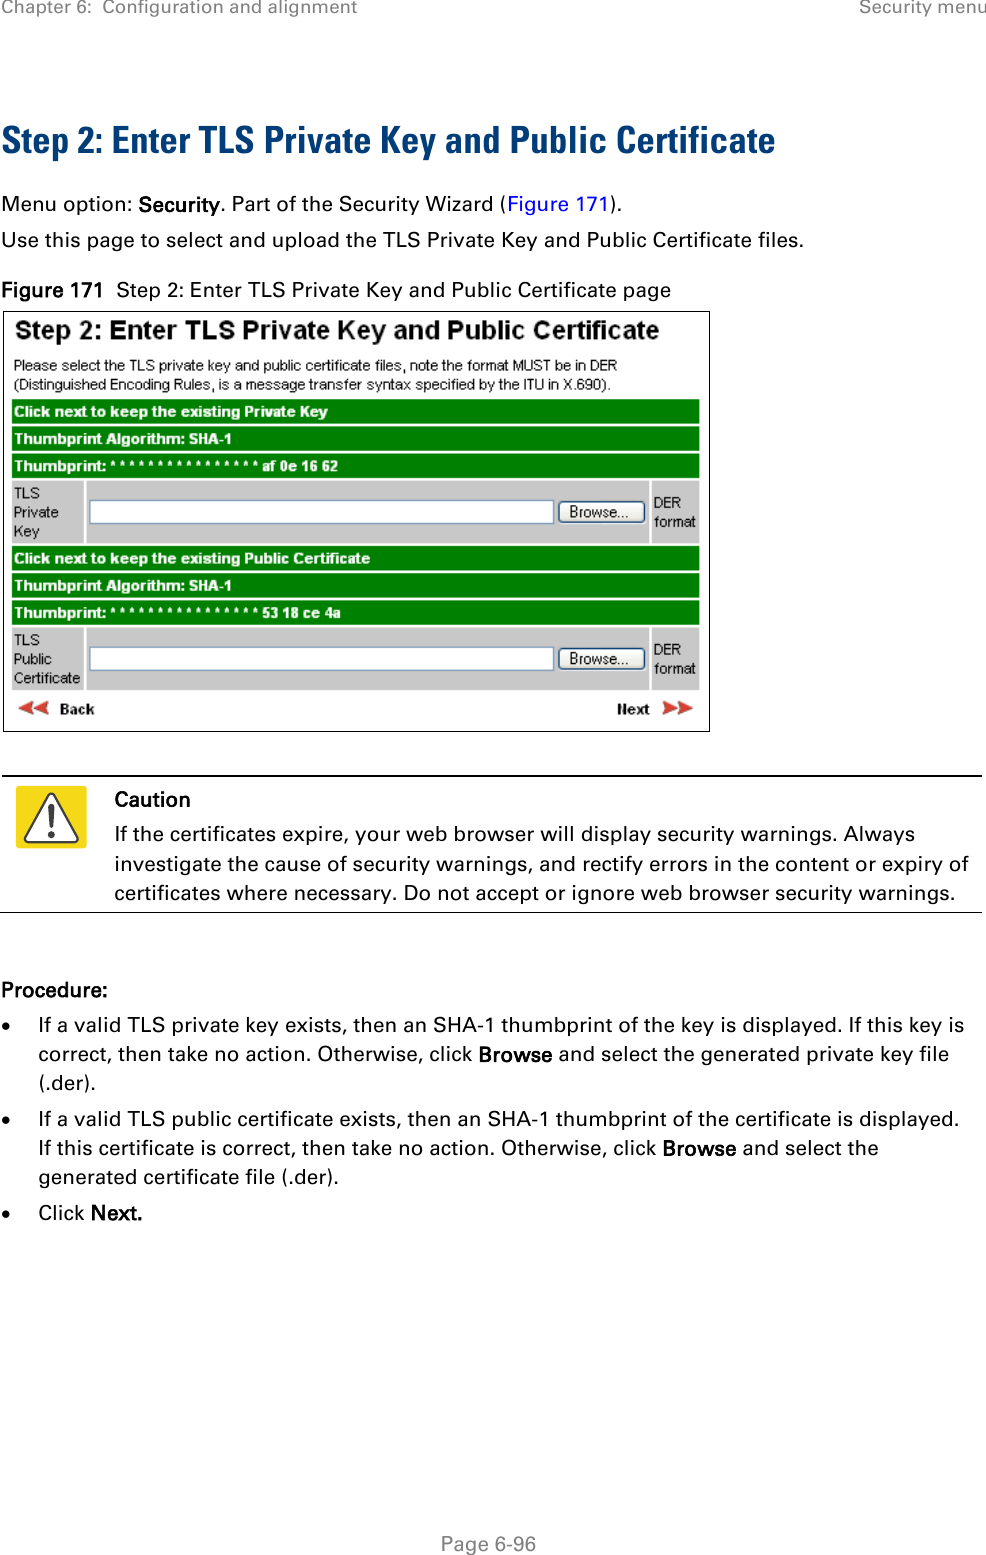 Chapter 6:  Configuration and alignment Security menu  Step 2: Enter TLS Private Key and Public Certificate Menu option: Security. Part of the Security Wizard (Figure 171). Use this page to select and upload the TLS Private Key and Public Certificate files. Figure 171  Step 2: Enter TLS Private Key and Public Certificate page    Caution If the certificates expire, your web browser will display security warnings. Always investigate the cause of security warnings, and rectify errors in the content or expiry of certificates where necessary. Do not accept or ignore web browser security warnings.  Procedure: • If a valid TLS private key exists, then an SHA-1 thumbprint of the key is displayed. If this key is correct, then take no action. Otherwise, click Browse and select the generated private key file (.der). • If a valid TLS public certificate exists, then an SHA-1 thumbprint of the certificate is displayed. If this certificate is correct, then take no action. Otherwise, click Browse and select the generated certificate file (.der). • Click Next.     Page 6-96 